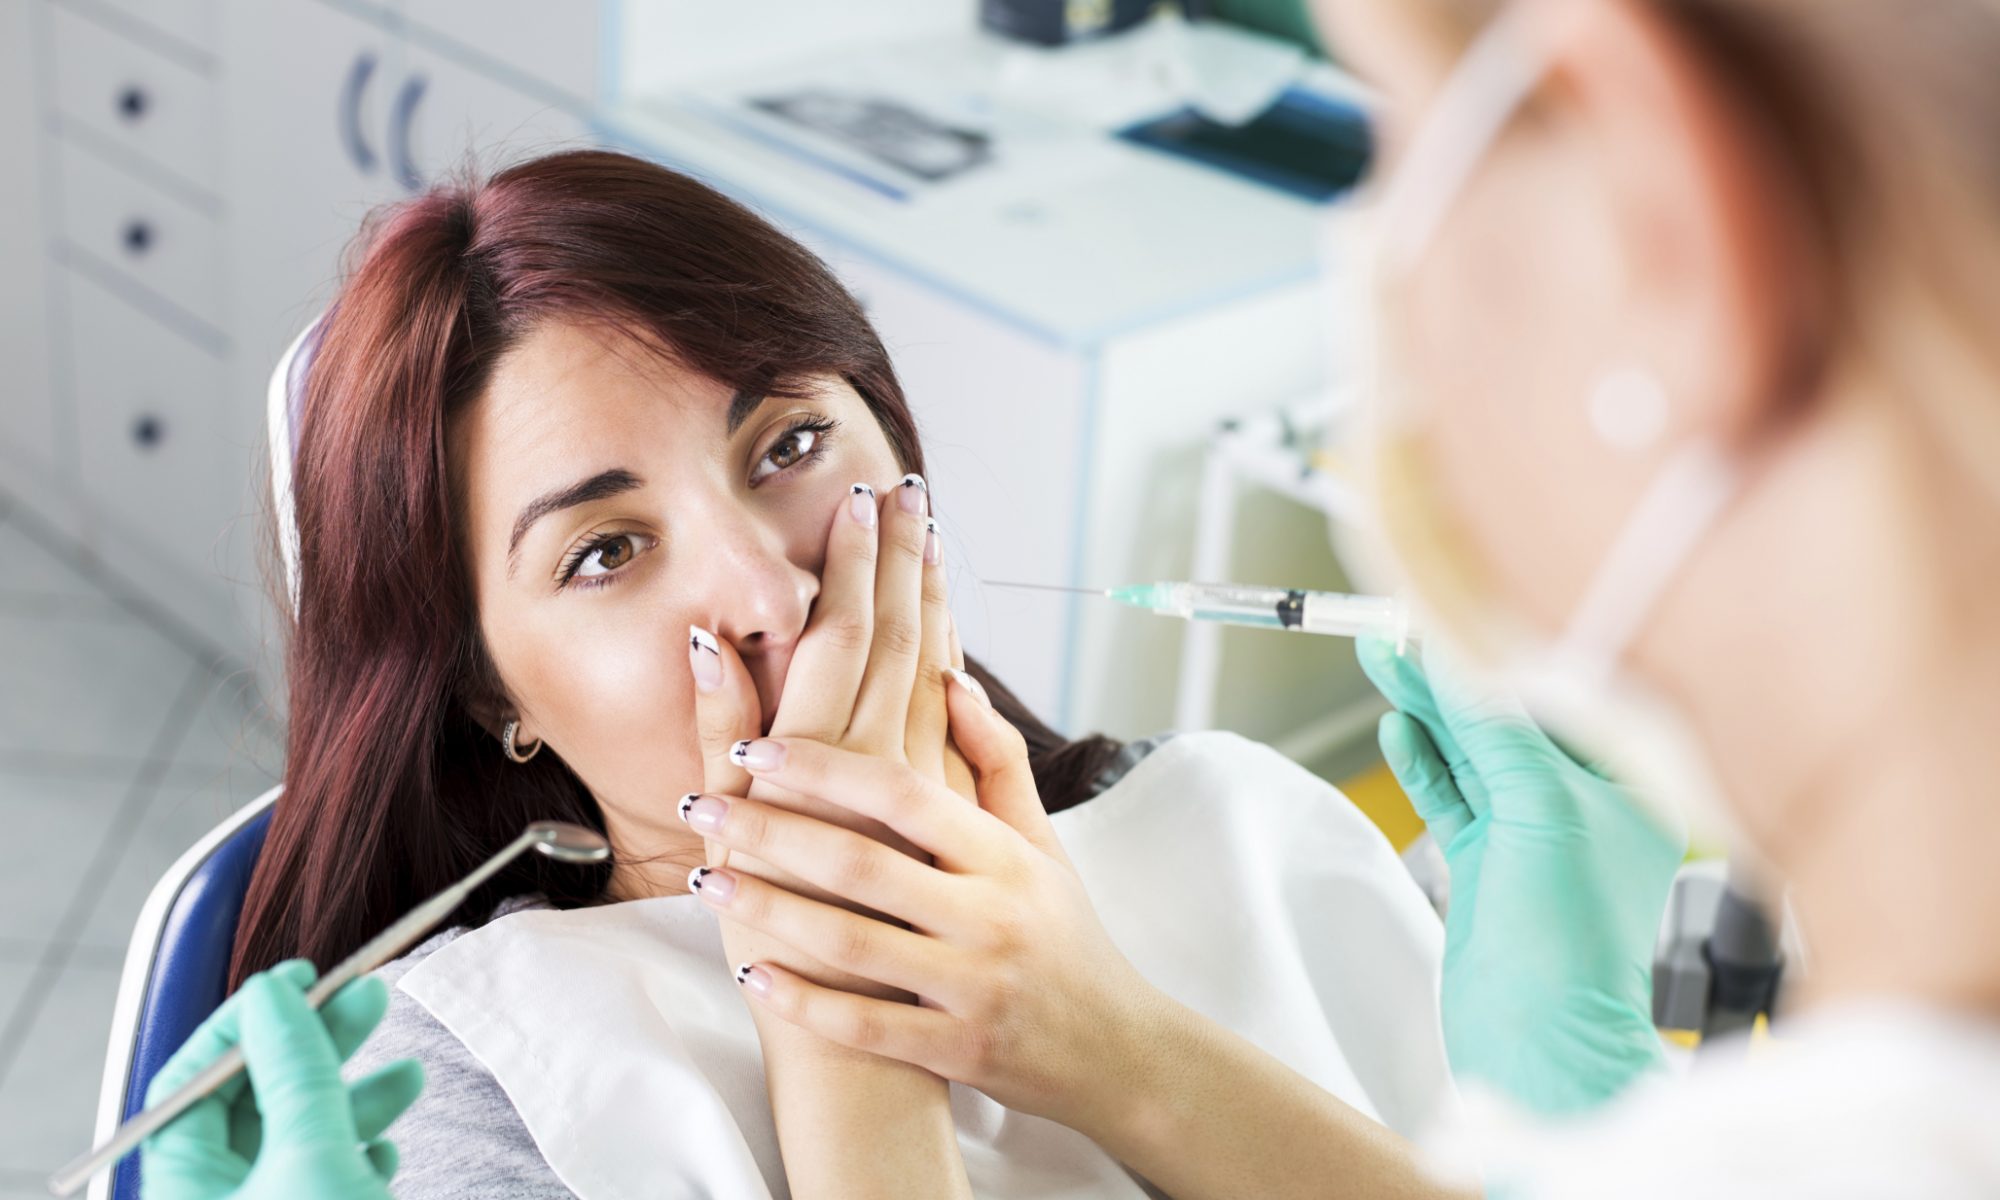 Woman at the dentist shielding her mouth because she is scared or has dental anxiety